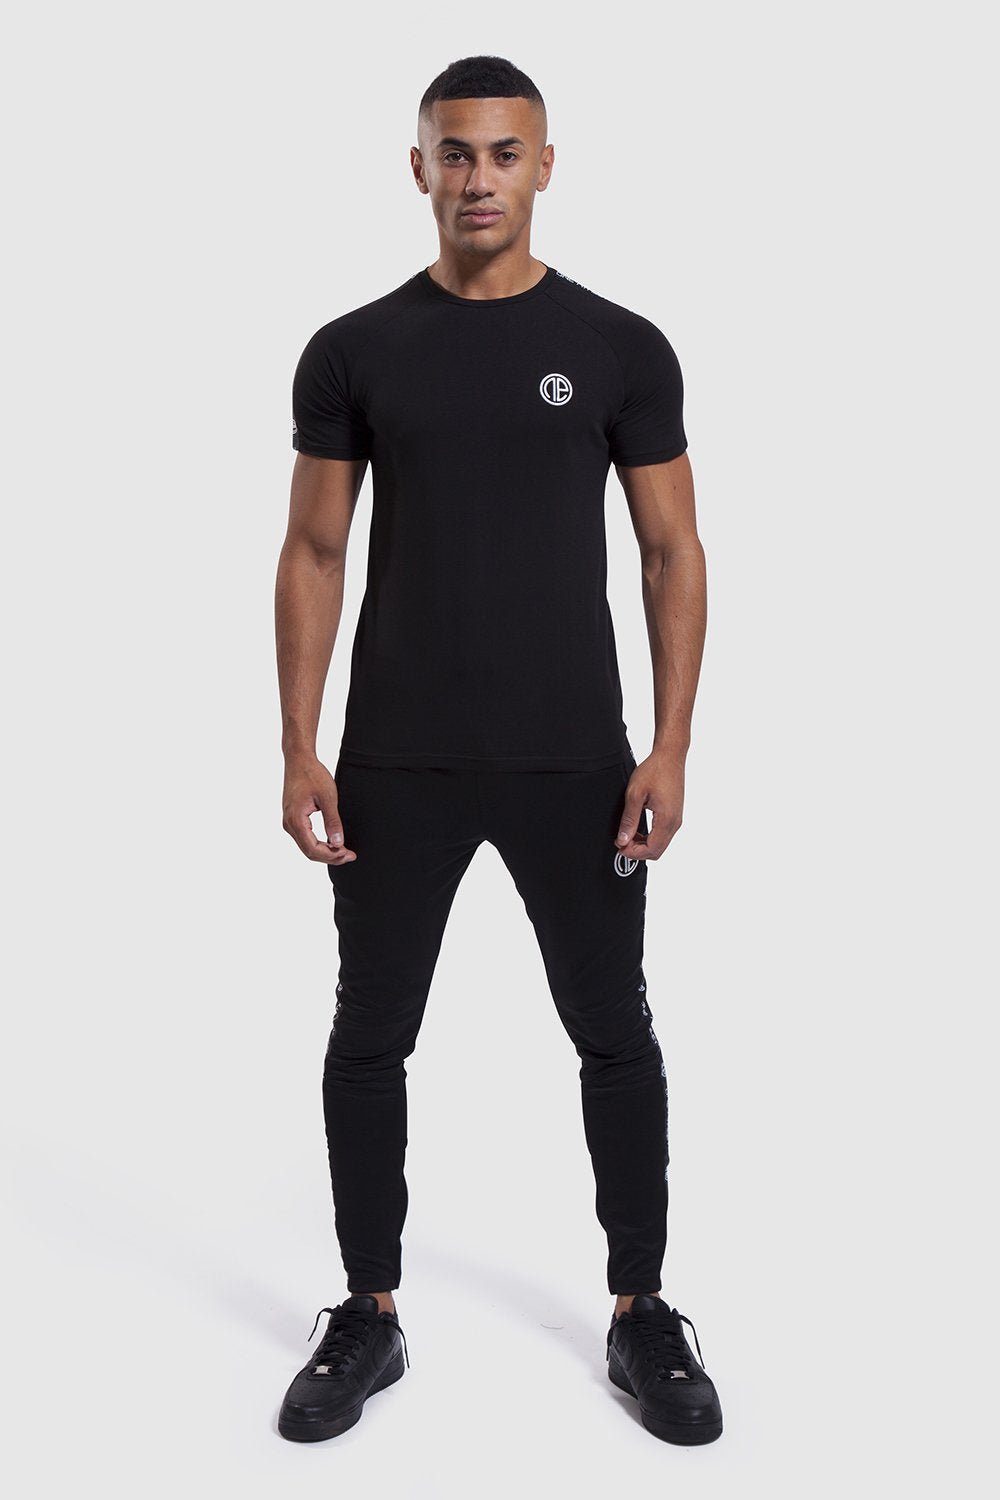 gym top and joggers in black by one athletic